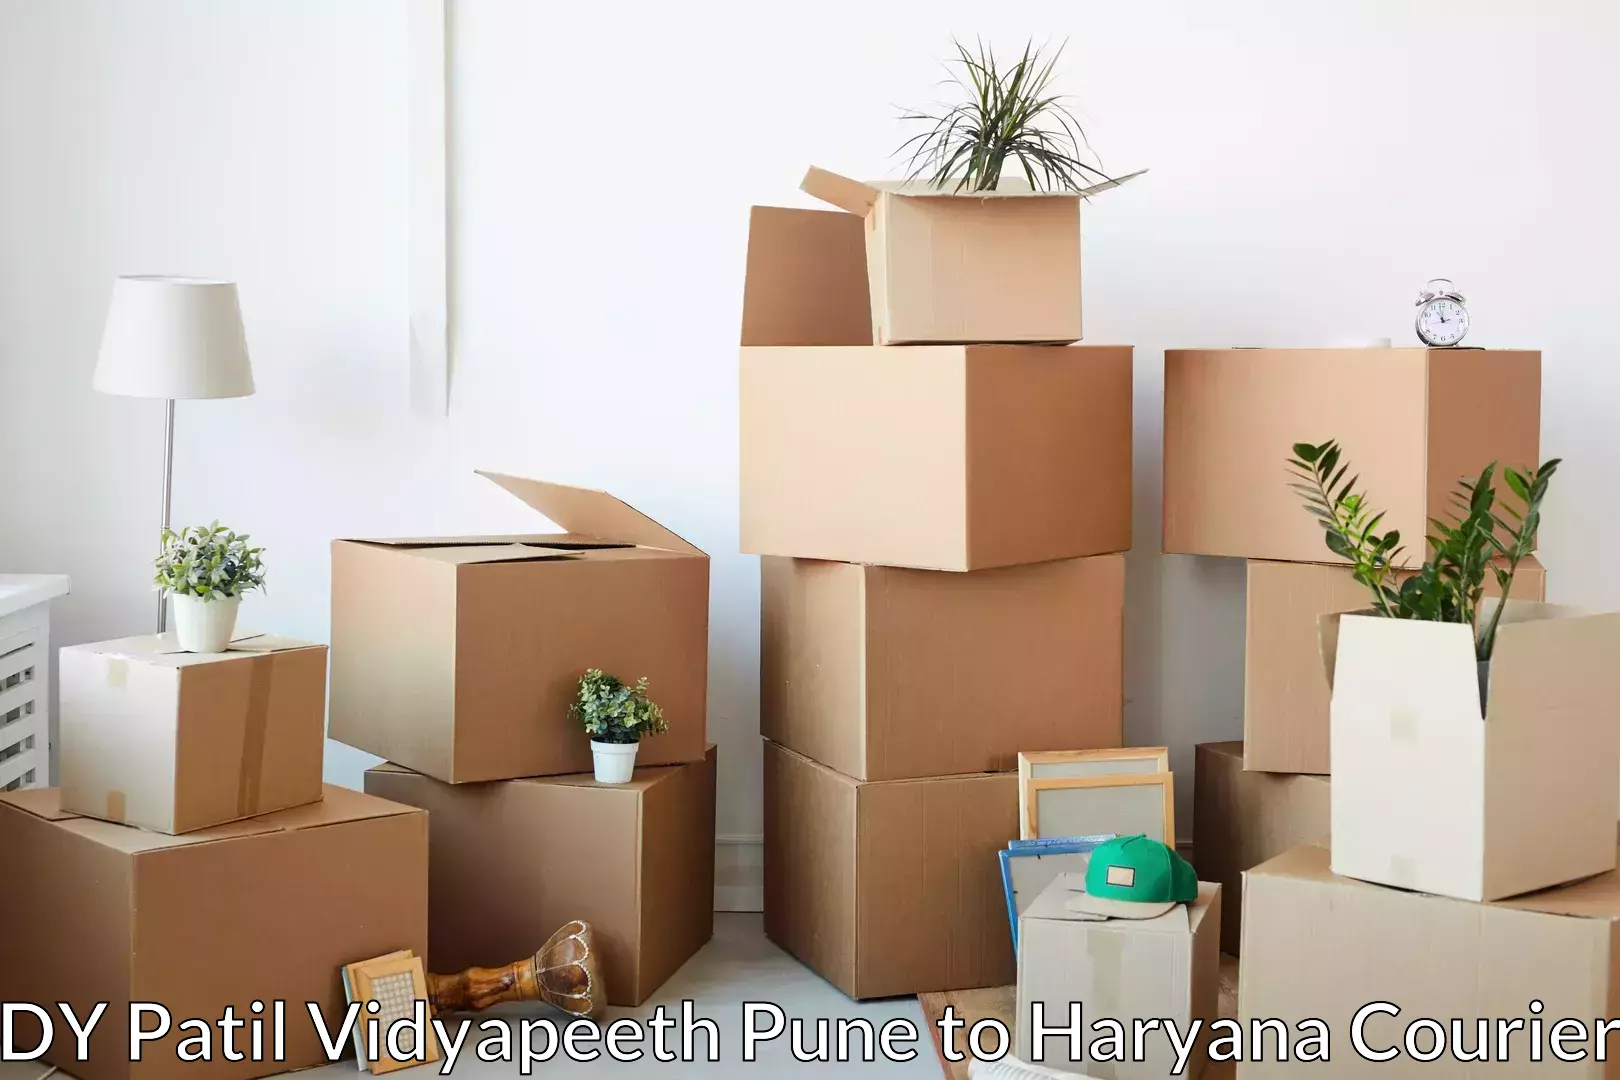 Furniture moving experts DY Patil Vidyapeeth Pune to Haryana